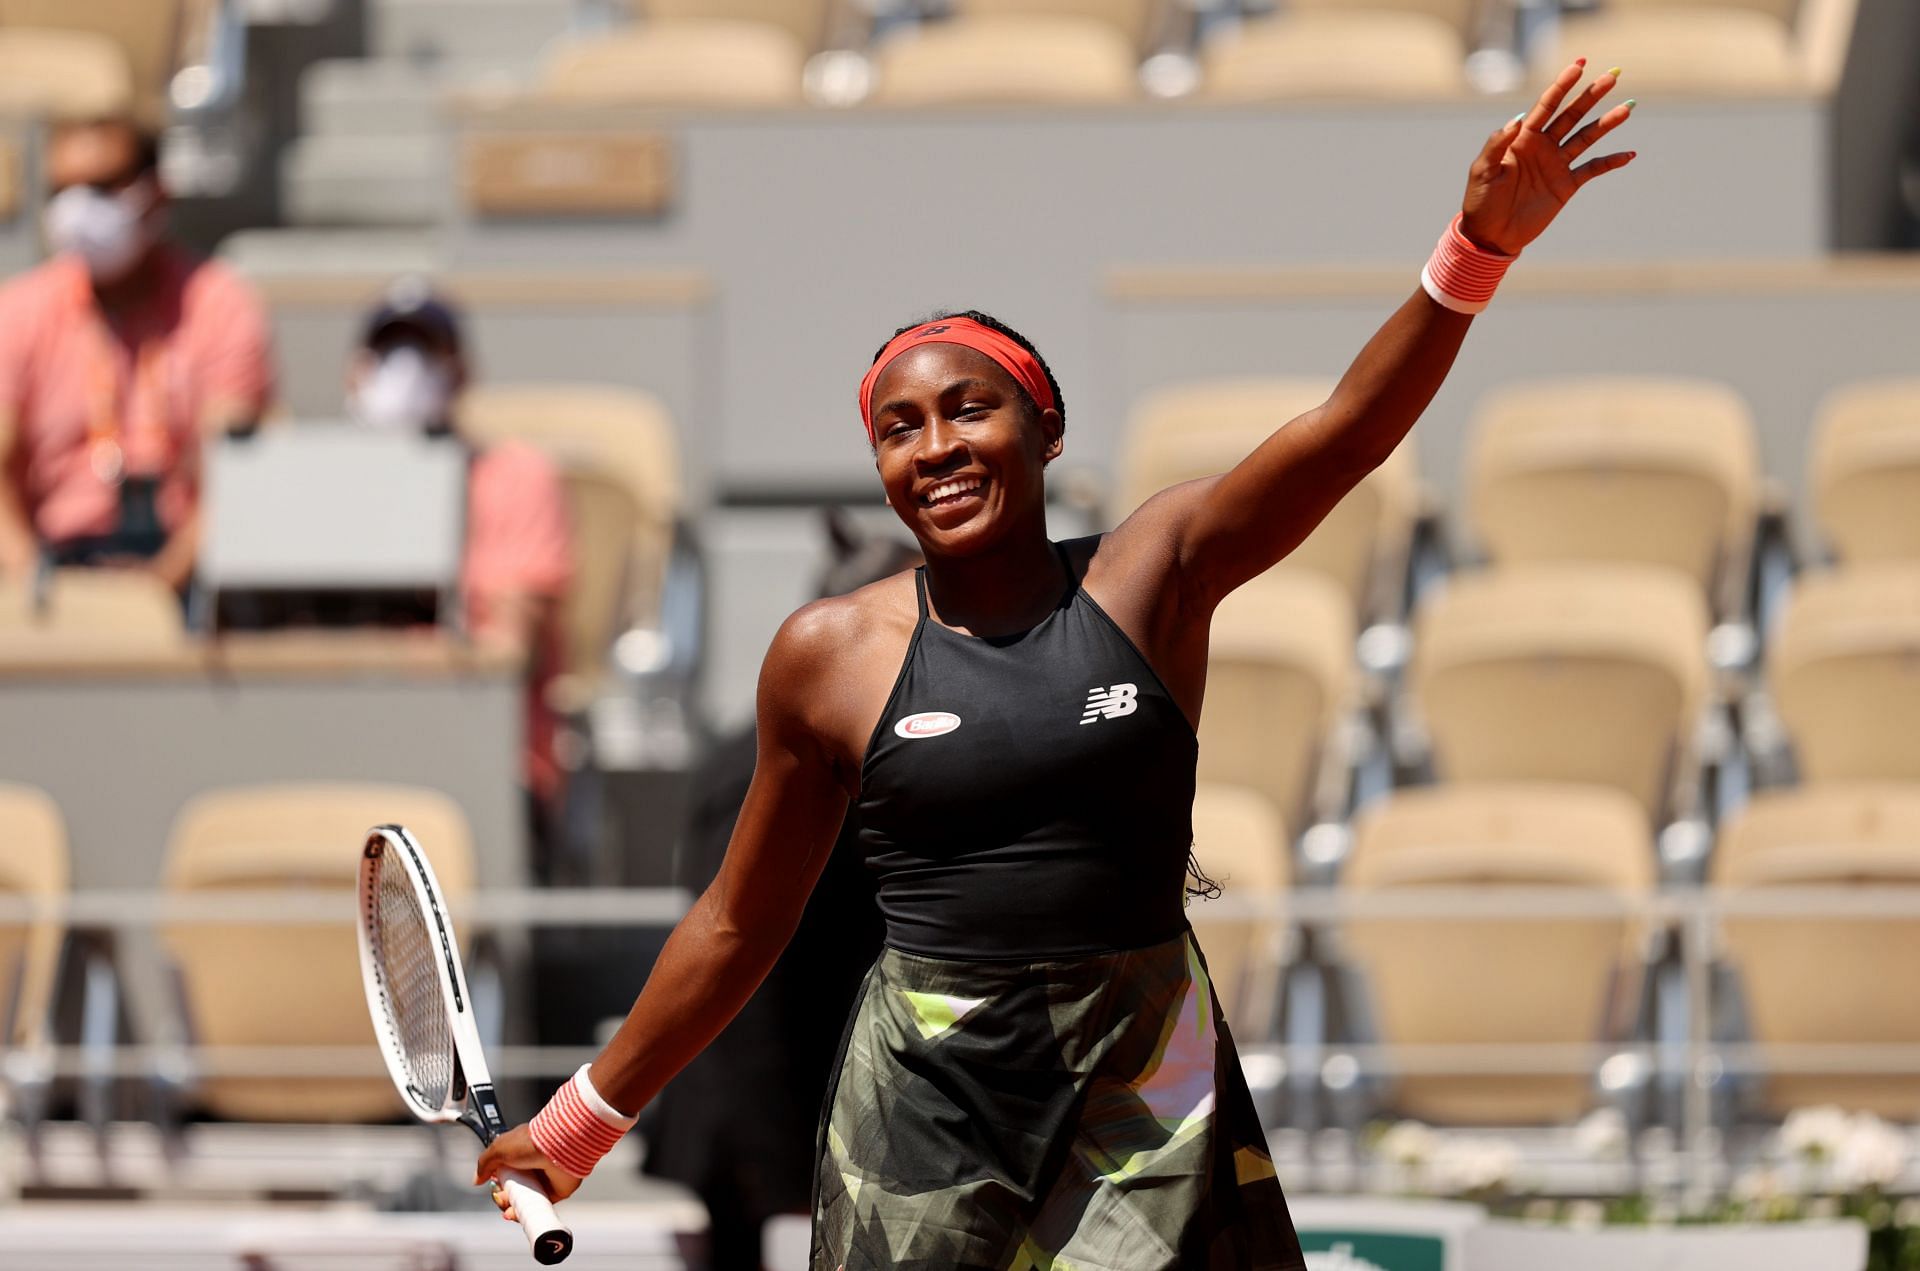 2021 French Open - Day Nine